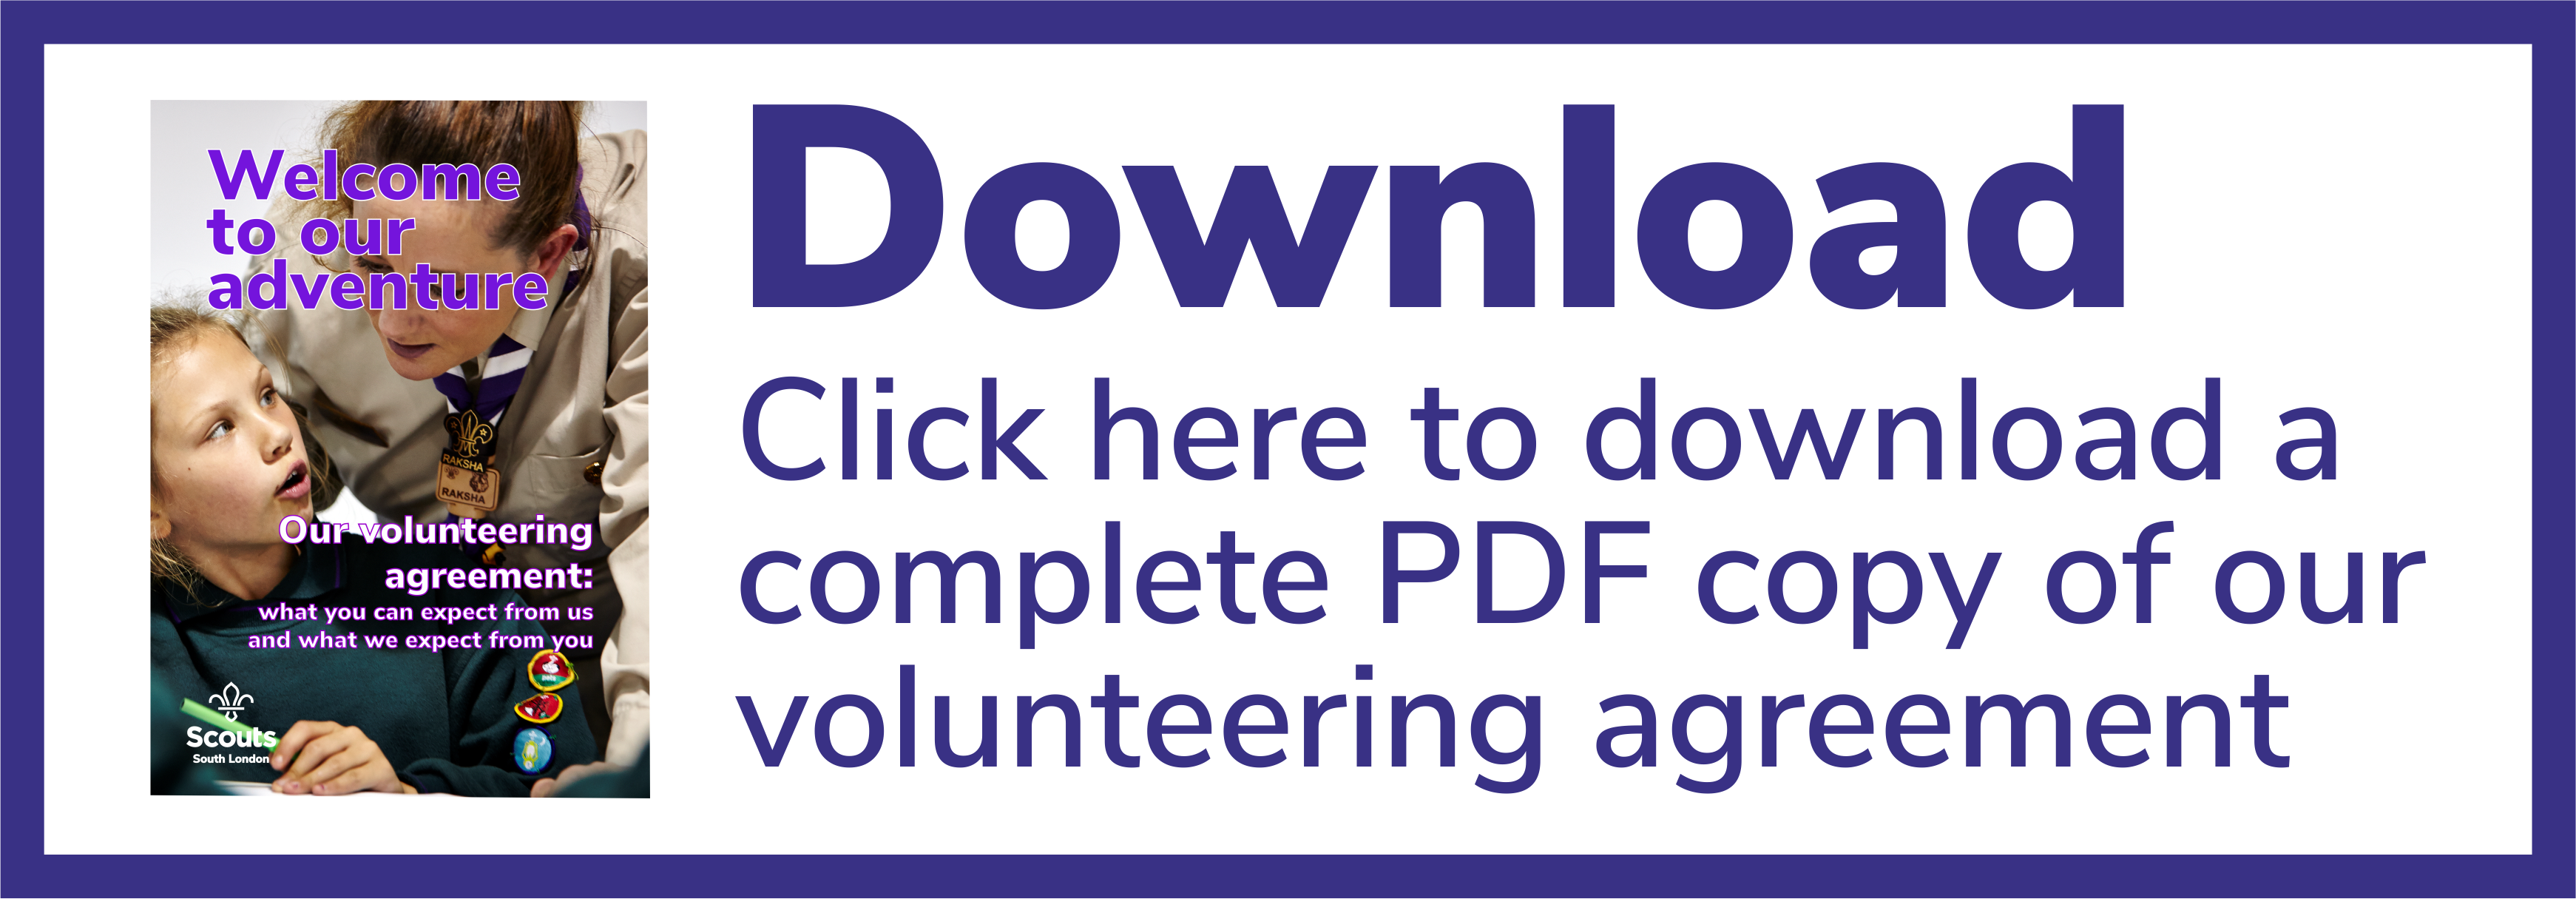 Click here to download a complete PDF copy of our volunteering agreement